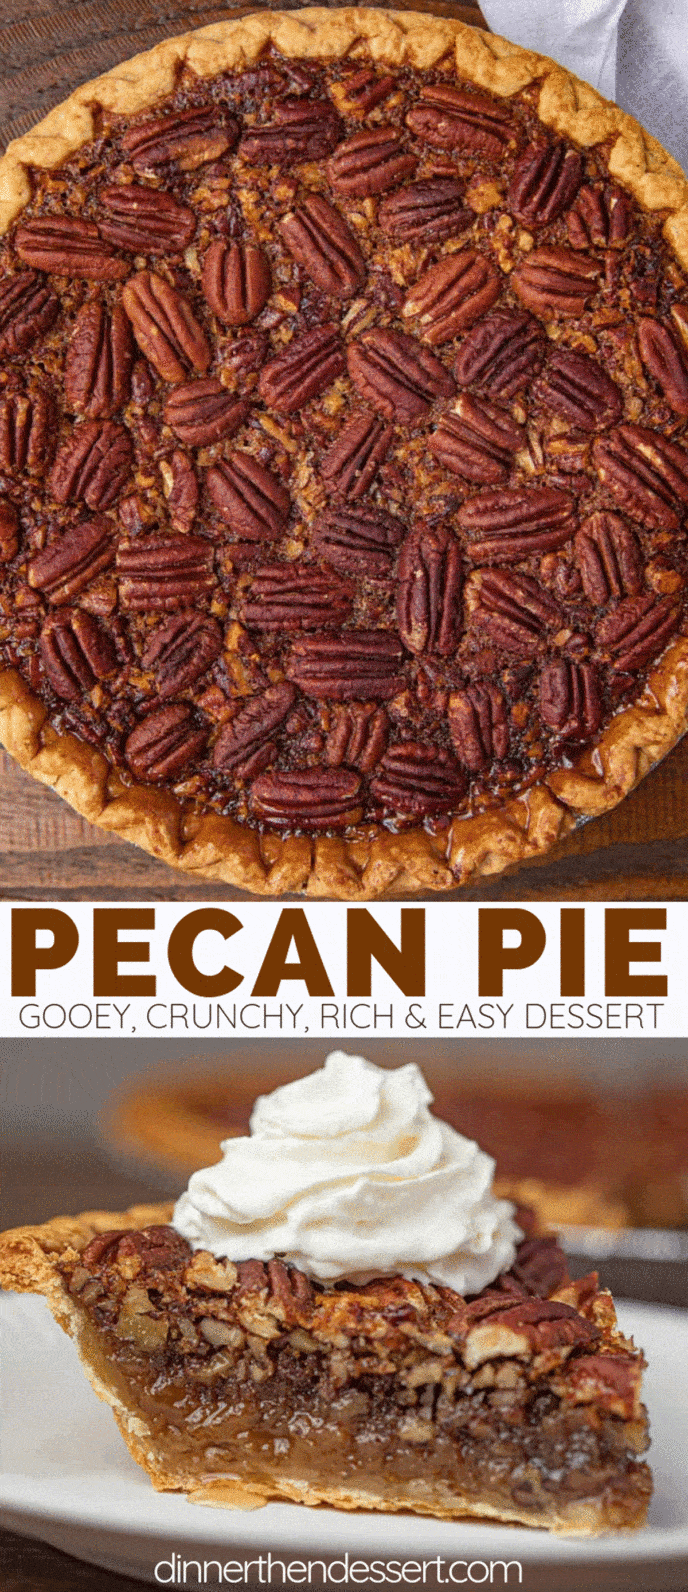 Pecan pie in a pan and pecan pie sliced with whipped cream